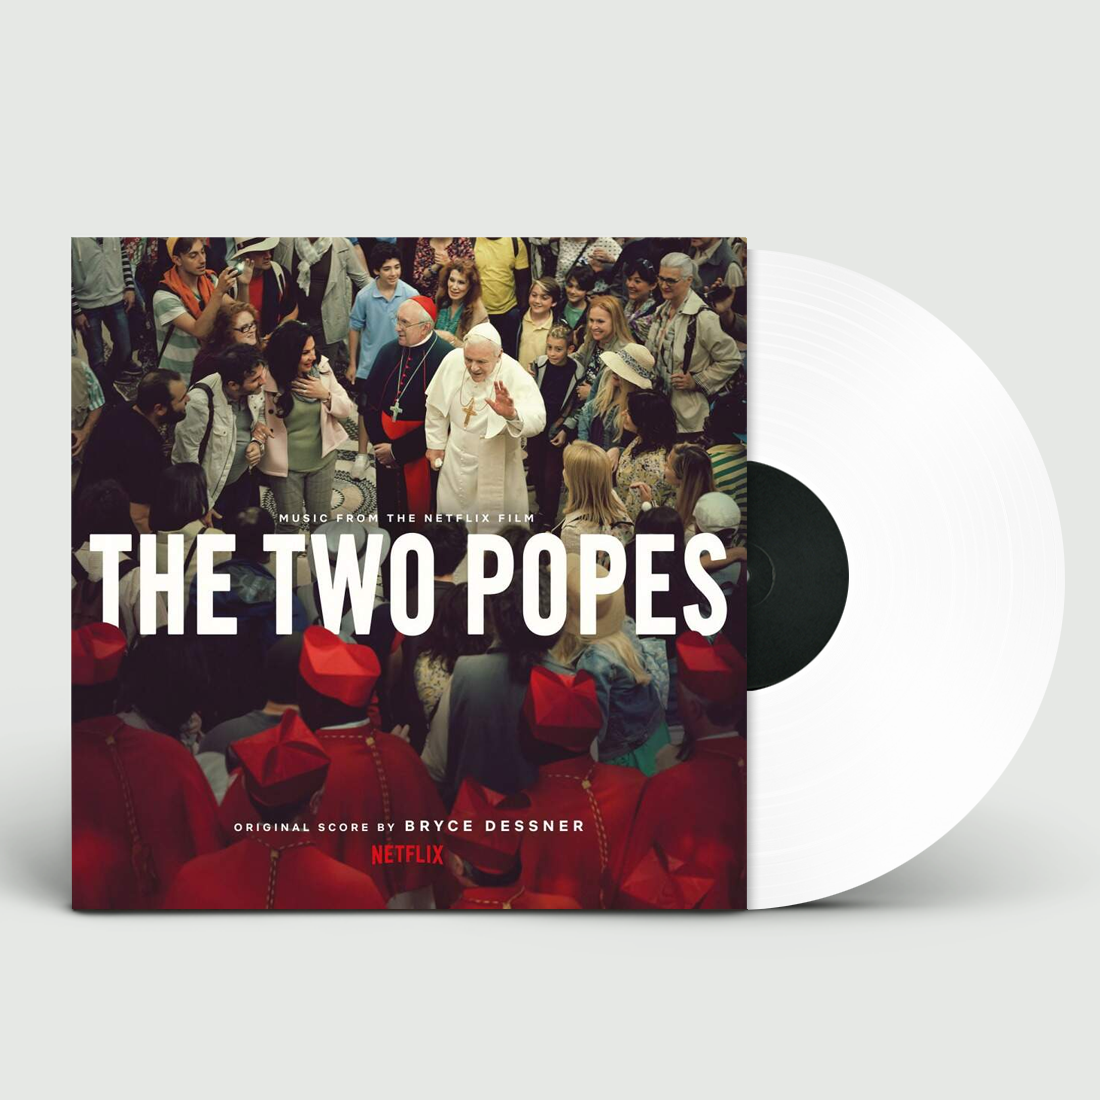 The Two Popes: Limited White Vinyl LP